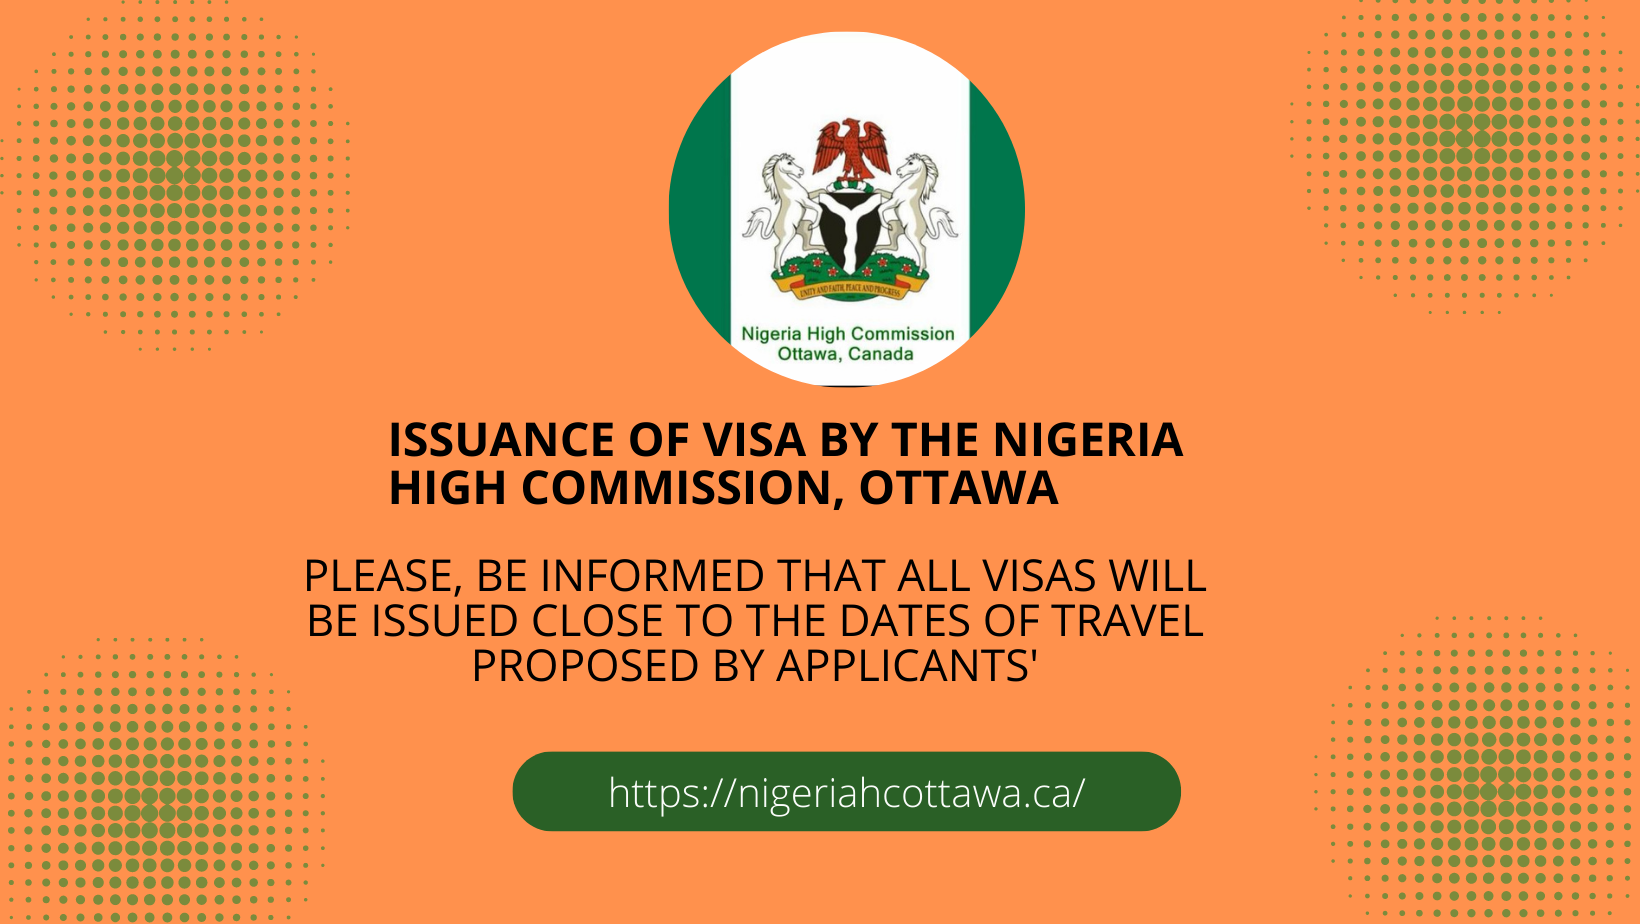 ISSUANCE OF VISA BY THE NIGERIA HIGH COMMISSION